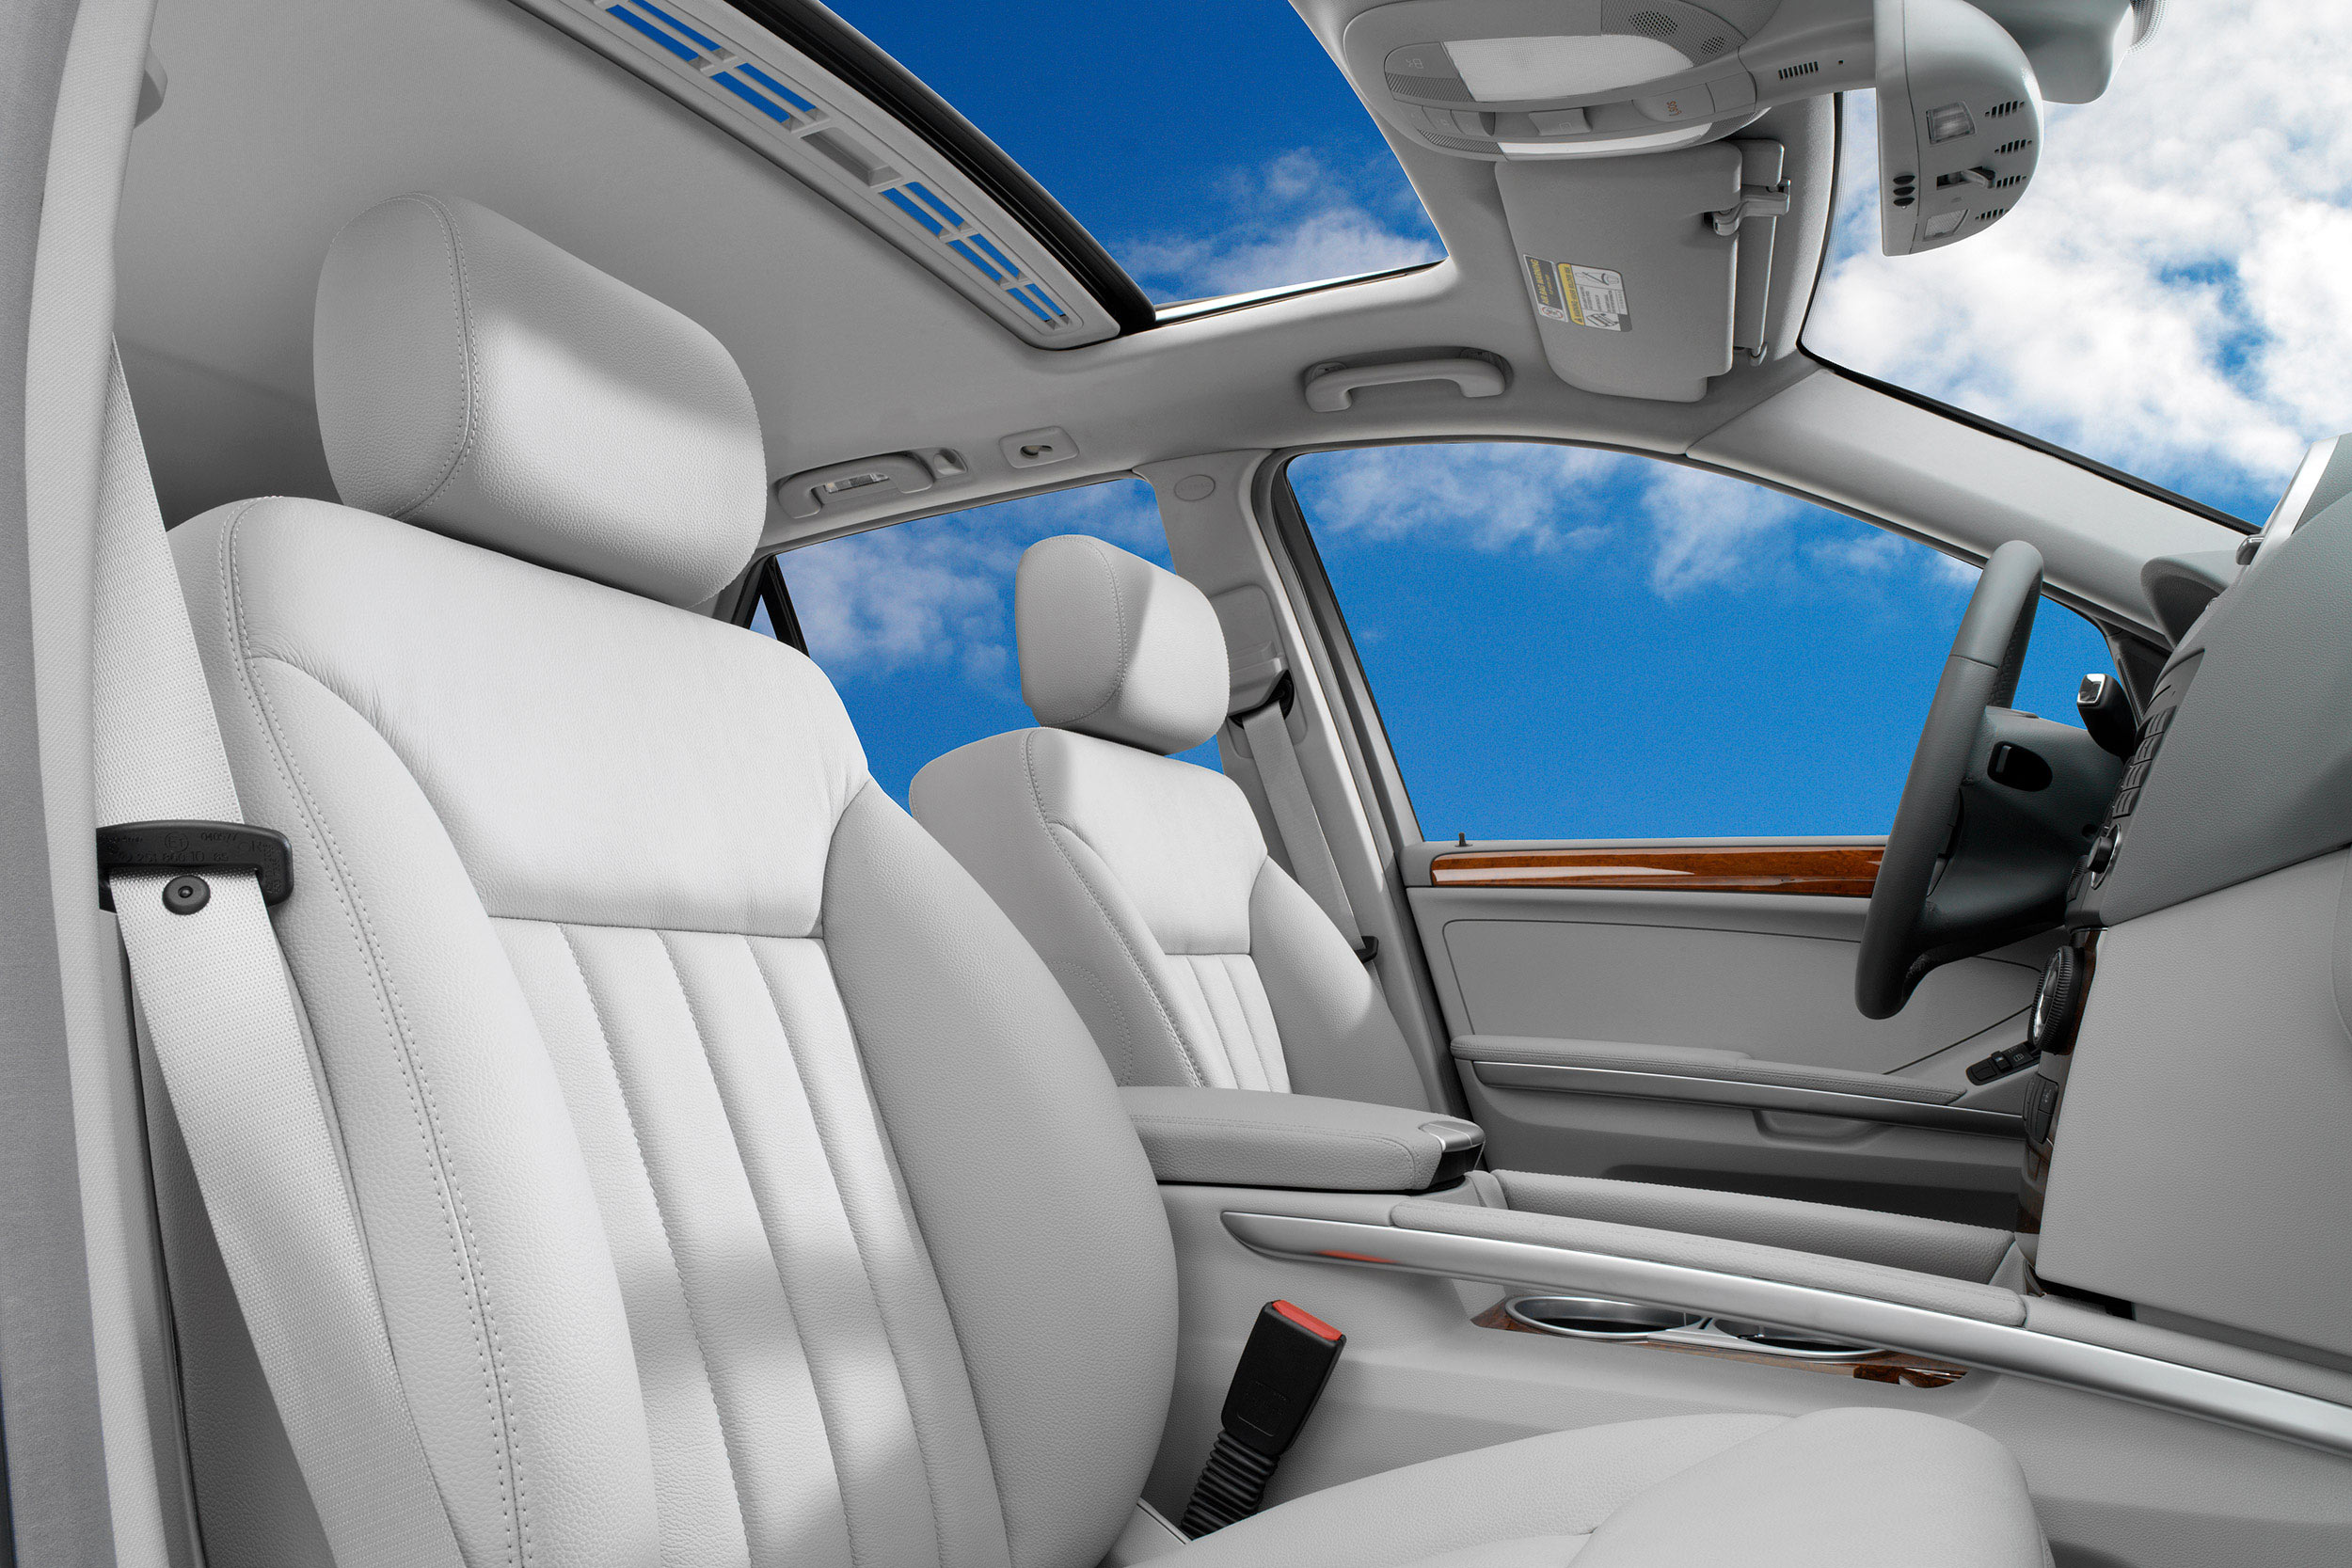 John Early High-End Digital Retouching - Interior View of SUV with White Seats Looking Out At Blue Skies